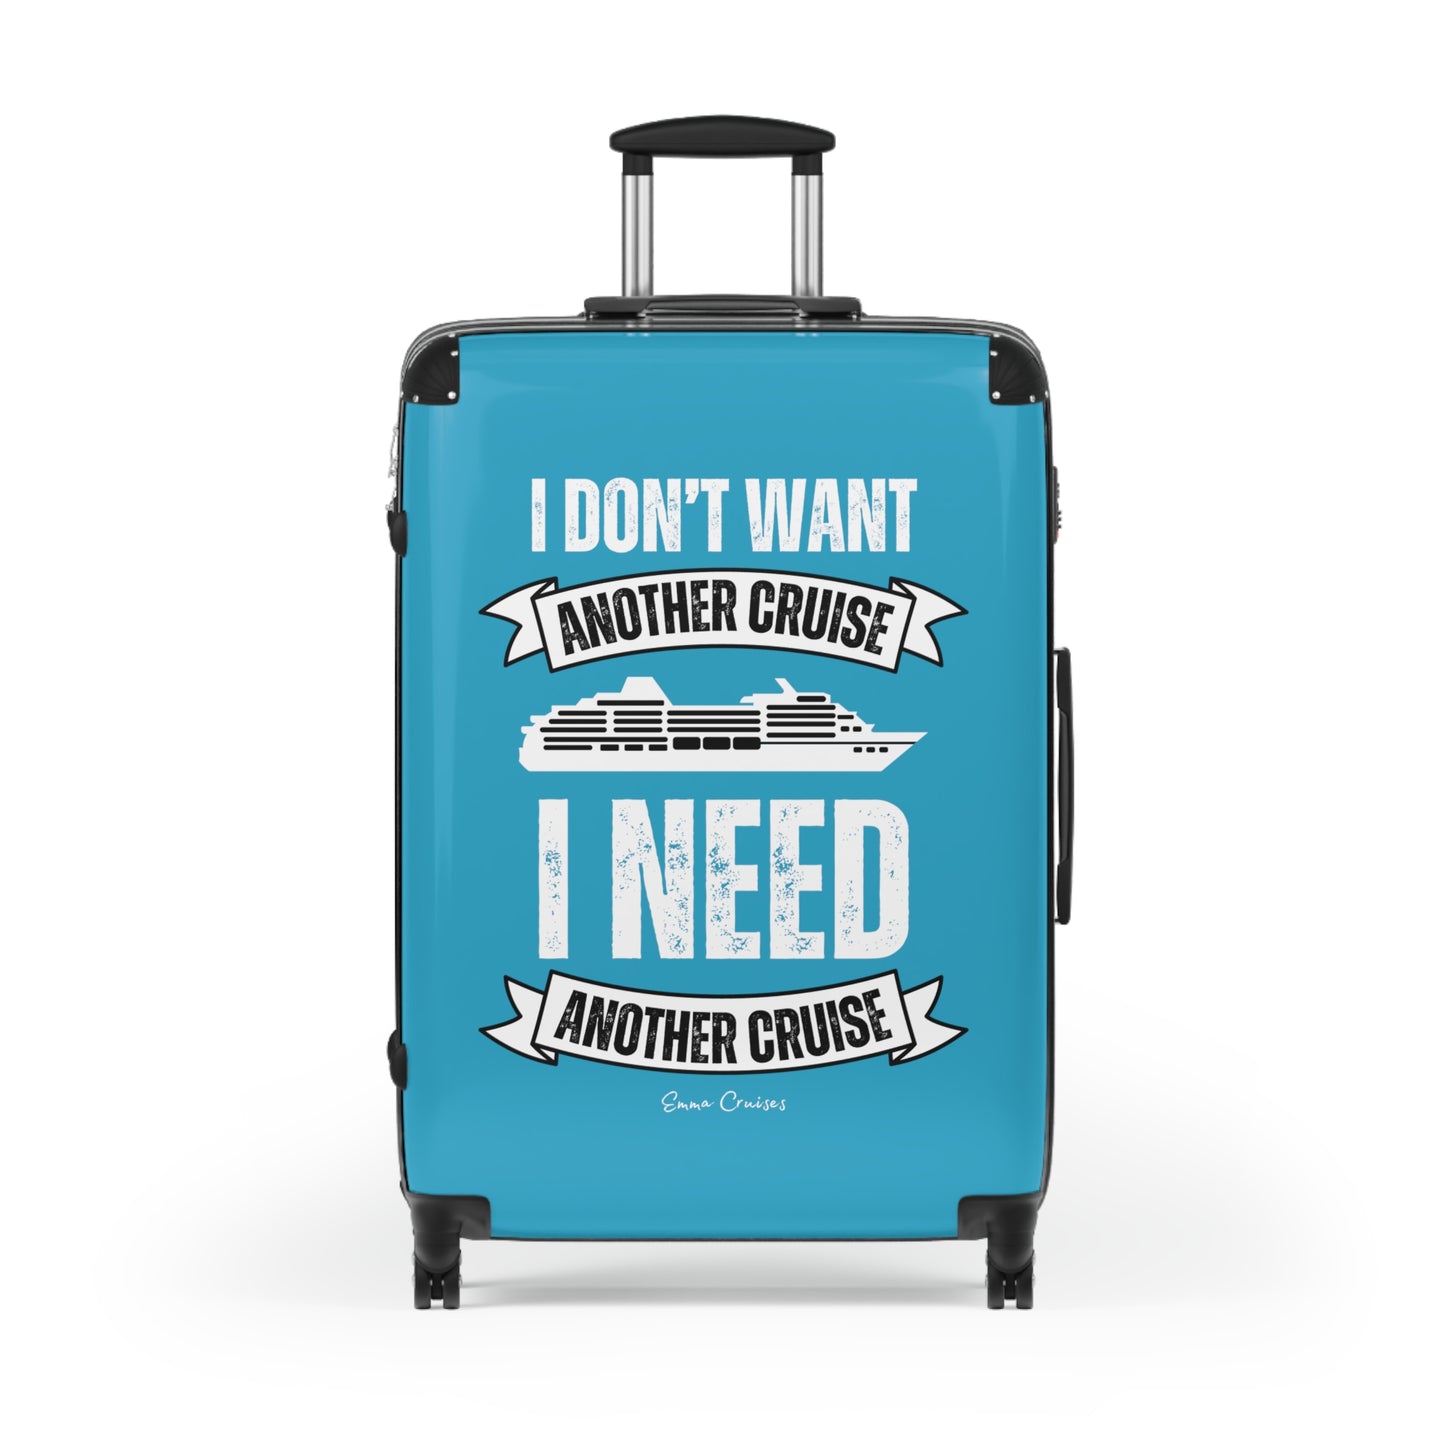 I Don't Want Another Cruise - Suitcase